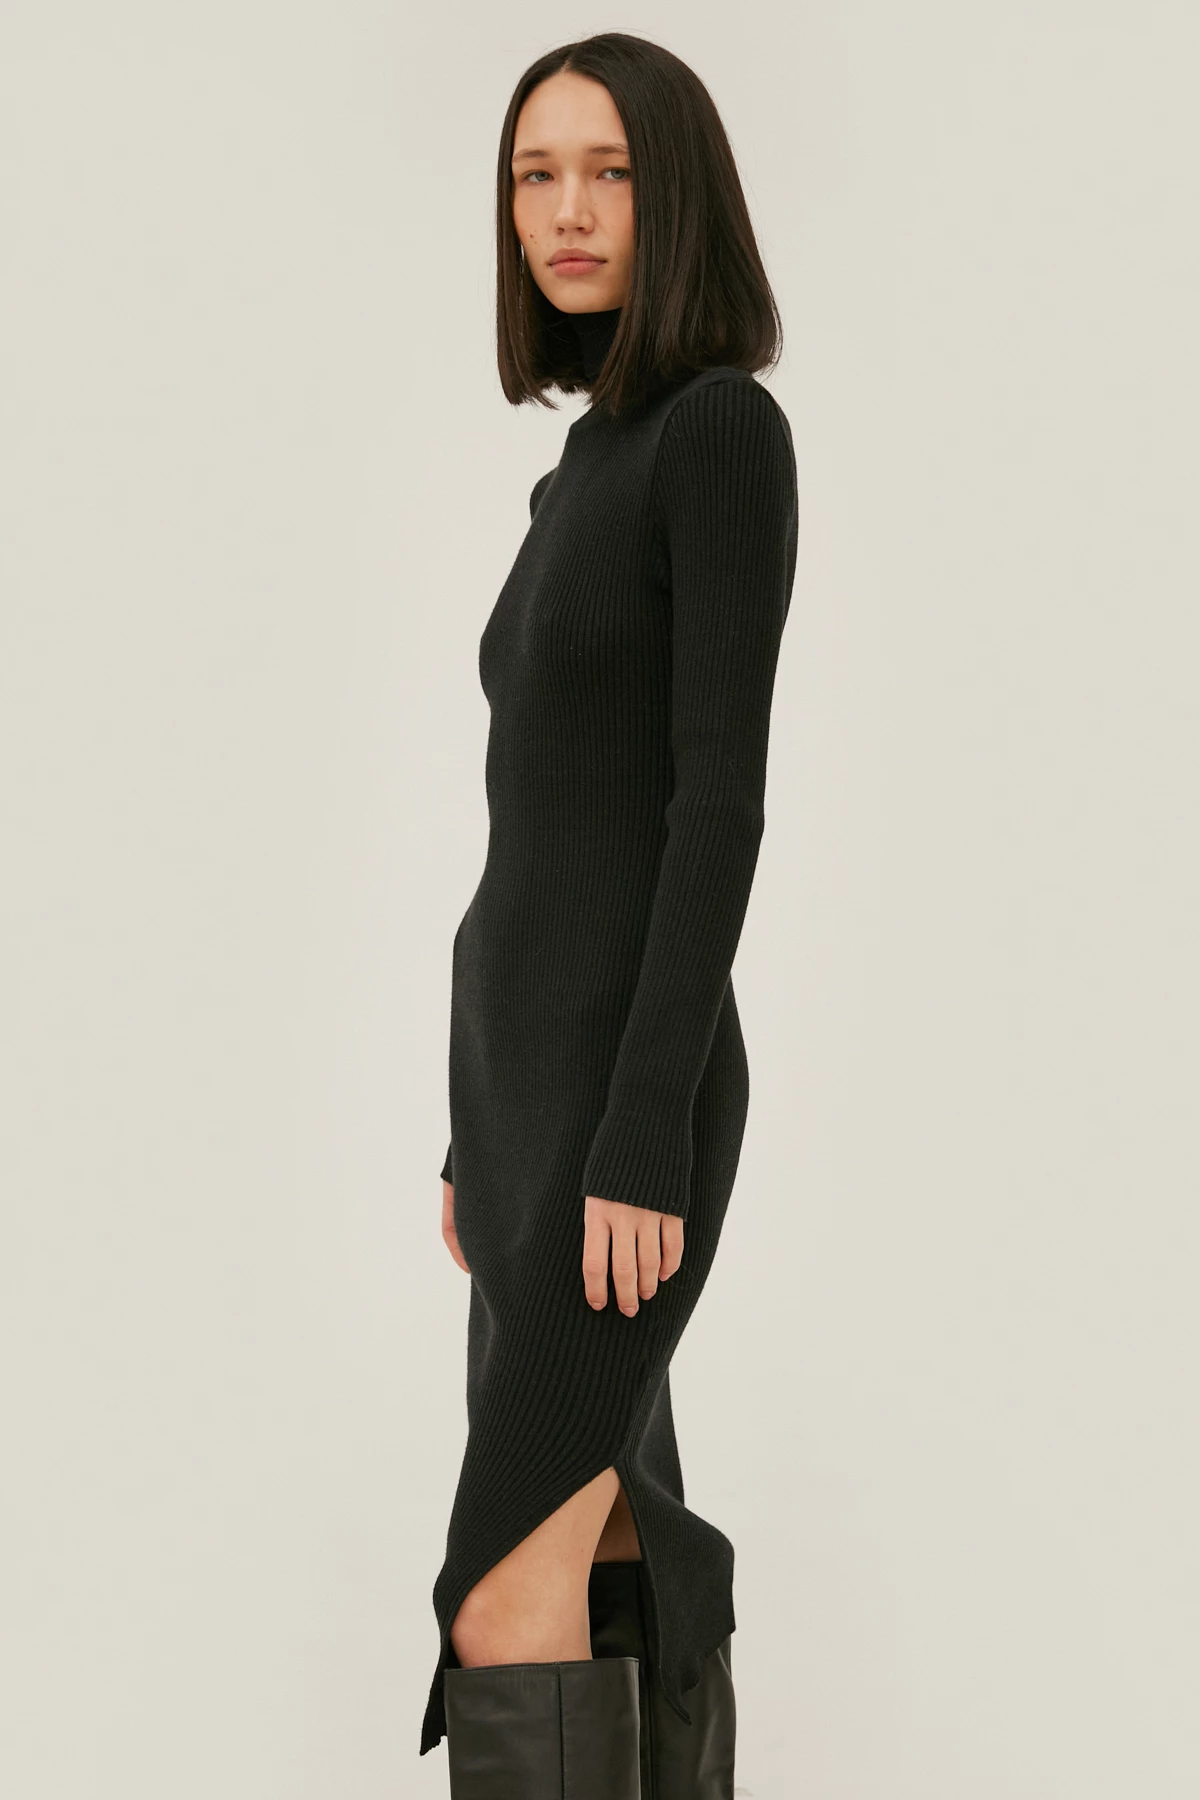 Knitted black dress with neckline and viscose, photo 4